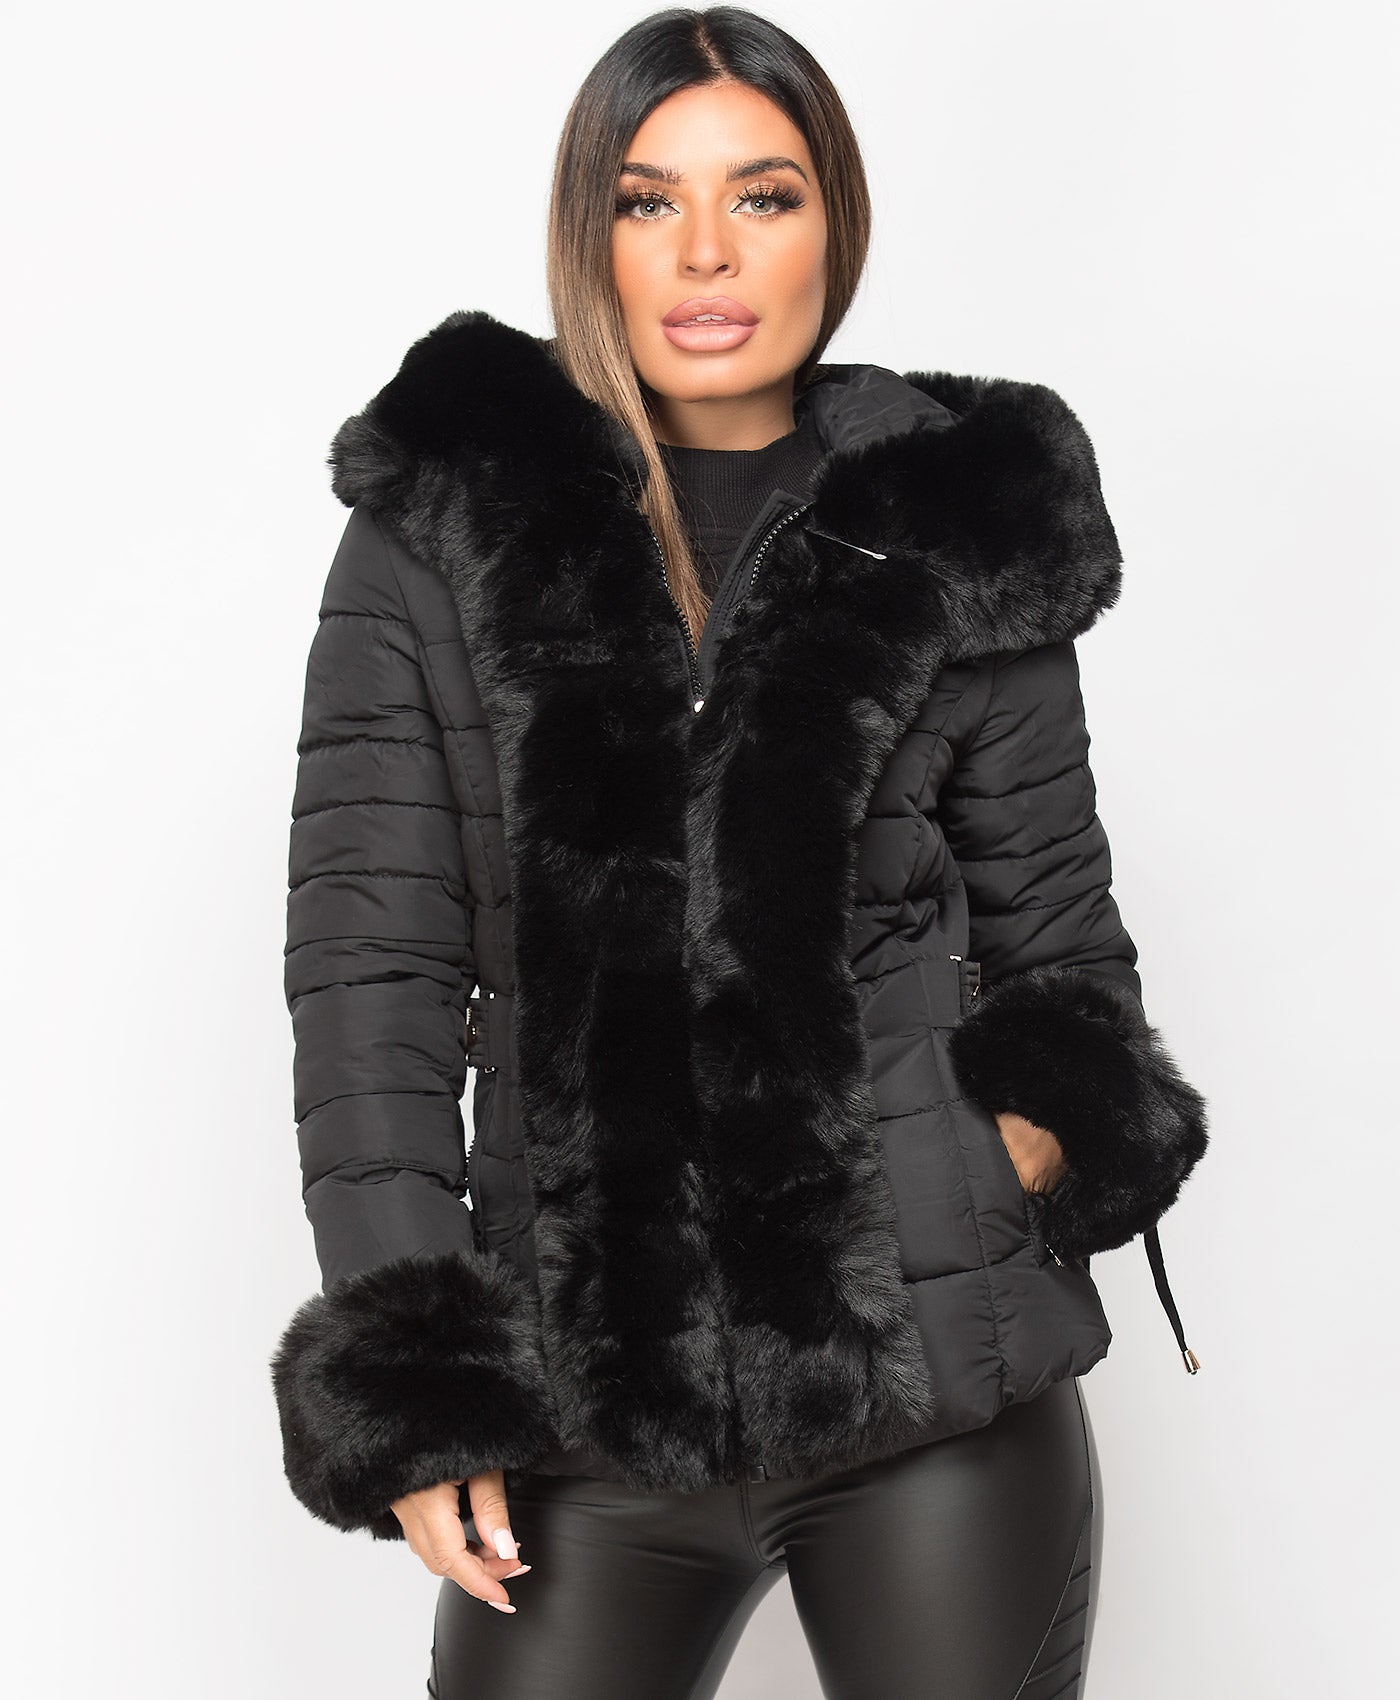 Black-Faux-Fur-Trim-Padded-Quilted-Hooded-Puffer-Jacket-Coat-4